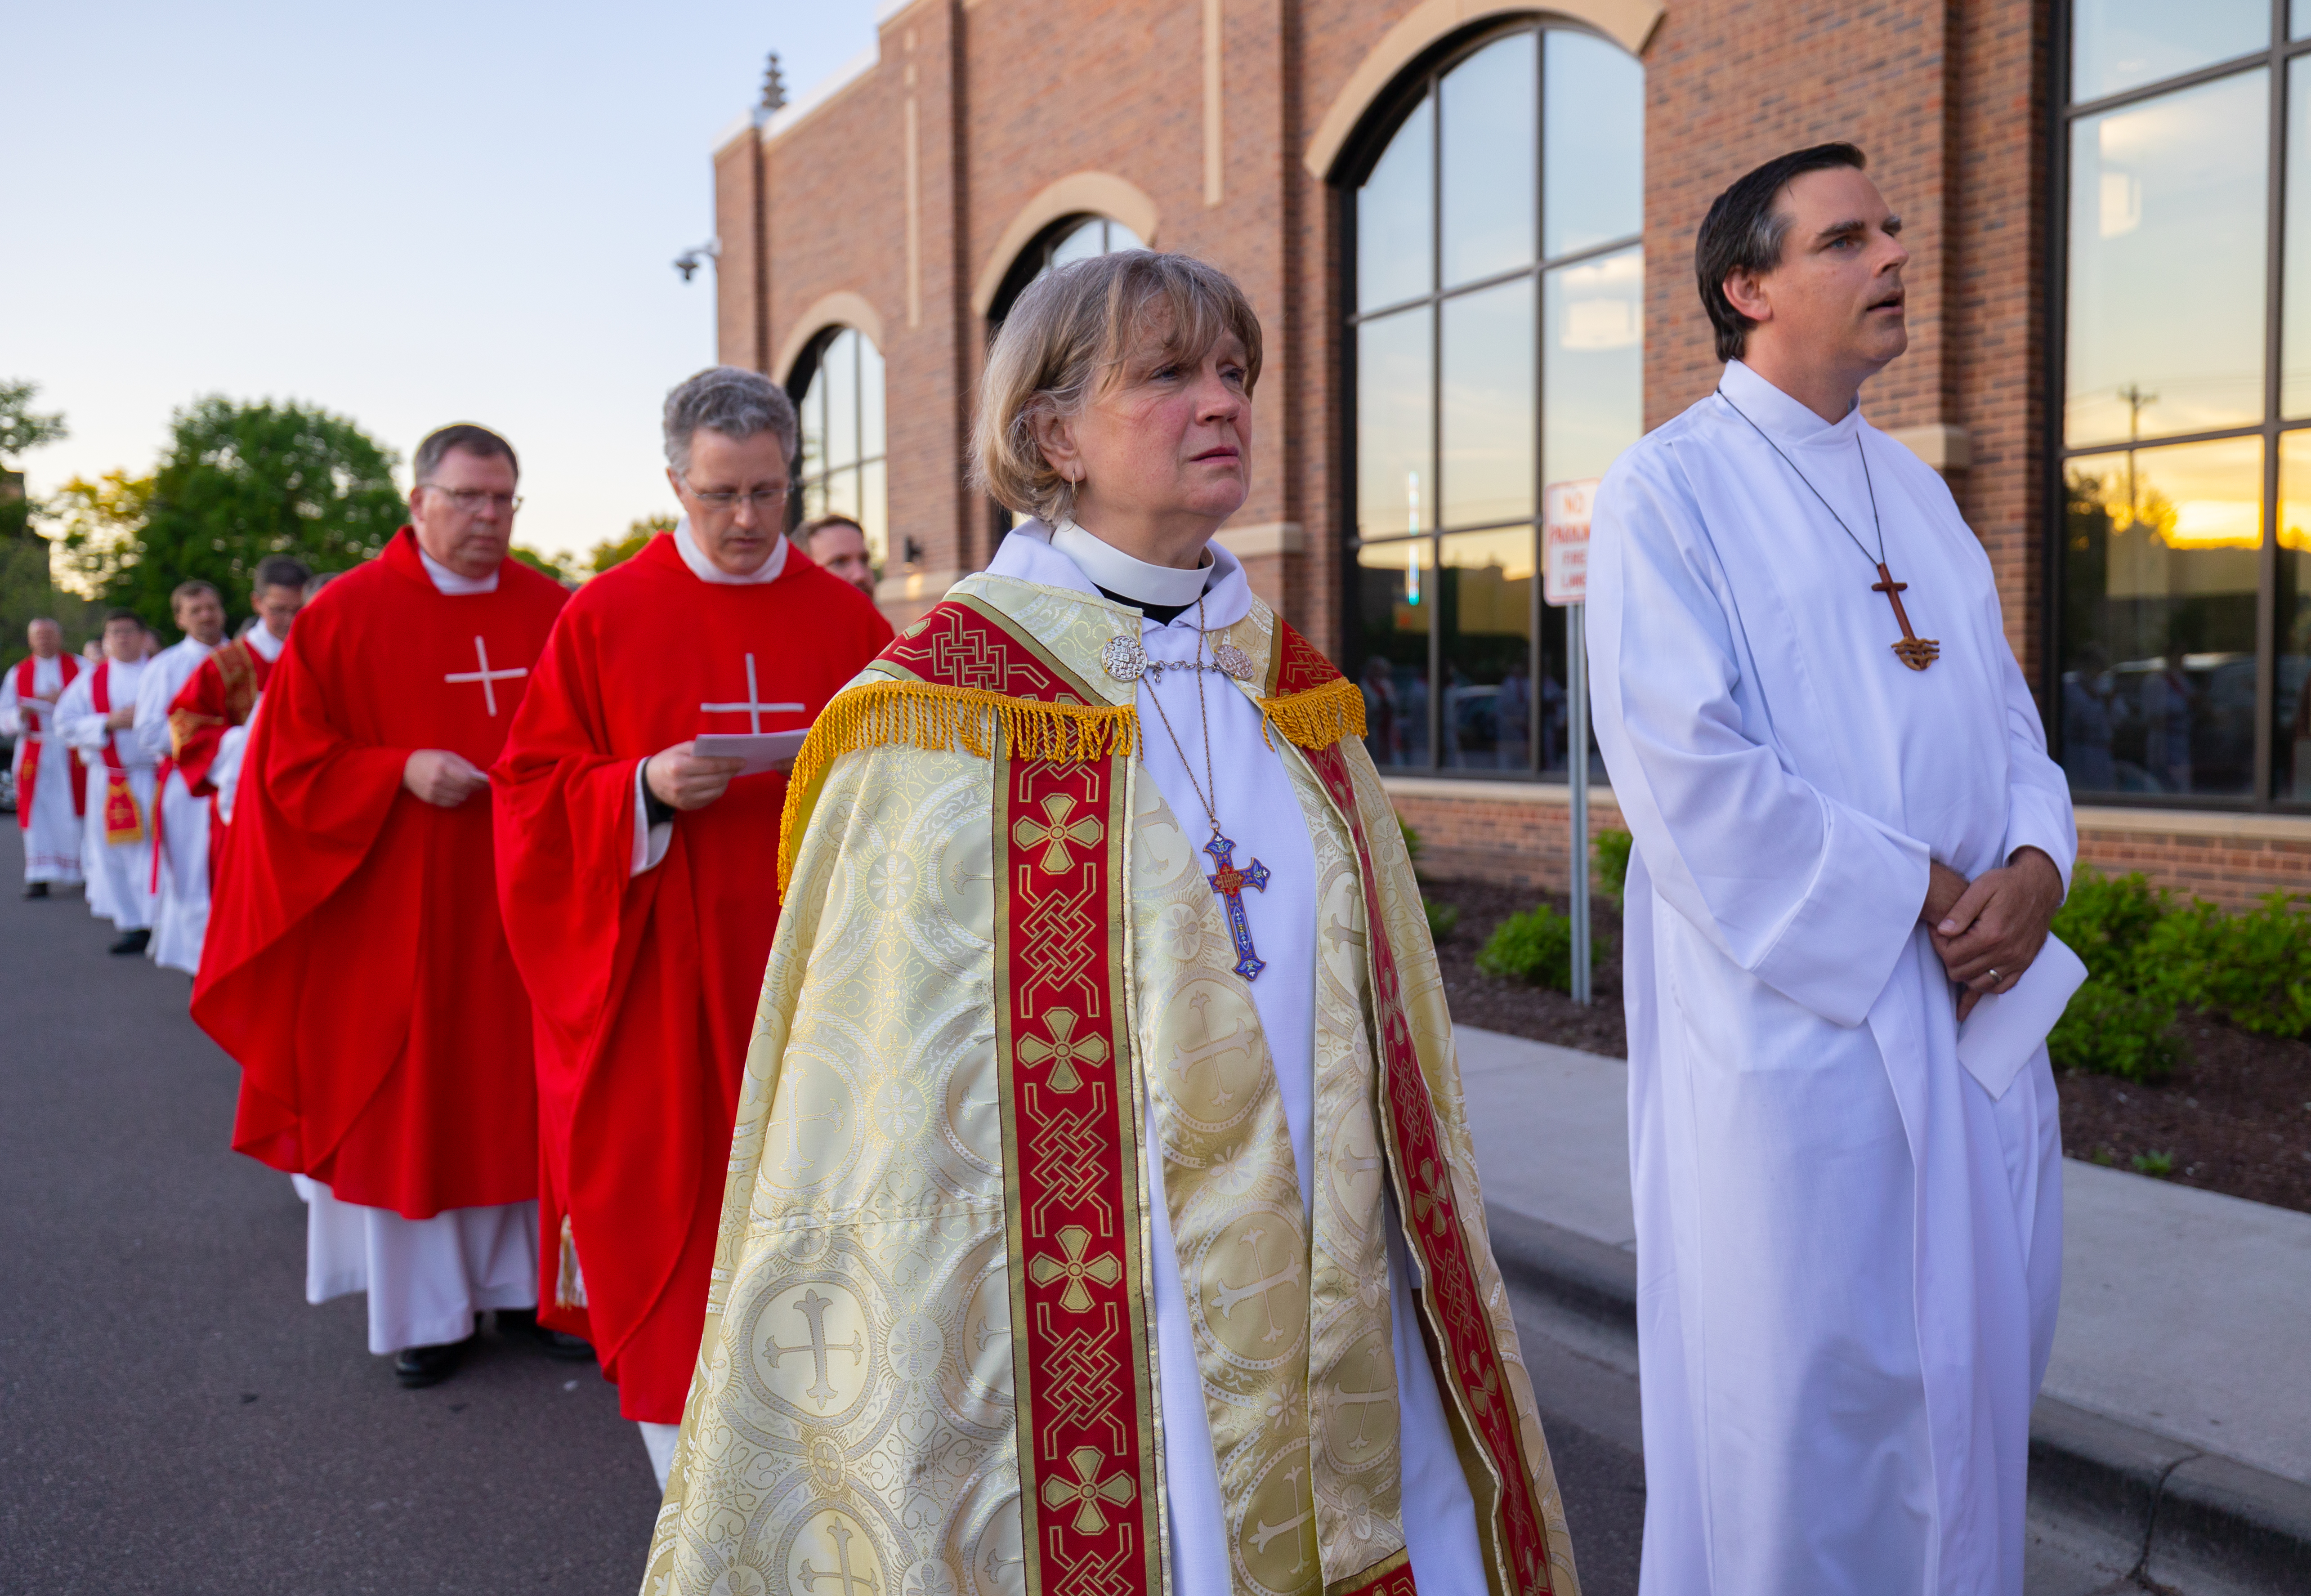 Bishop Anne Svennungsen of the Minneapolis Area Synod ELCA and Rev. Jerad Morey, Director of Strategic Relationships for Minnesota Council of Churches, take part in a worship procession at the Archdiocese of St. Paul and Minneapolis Synod